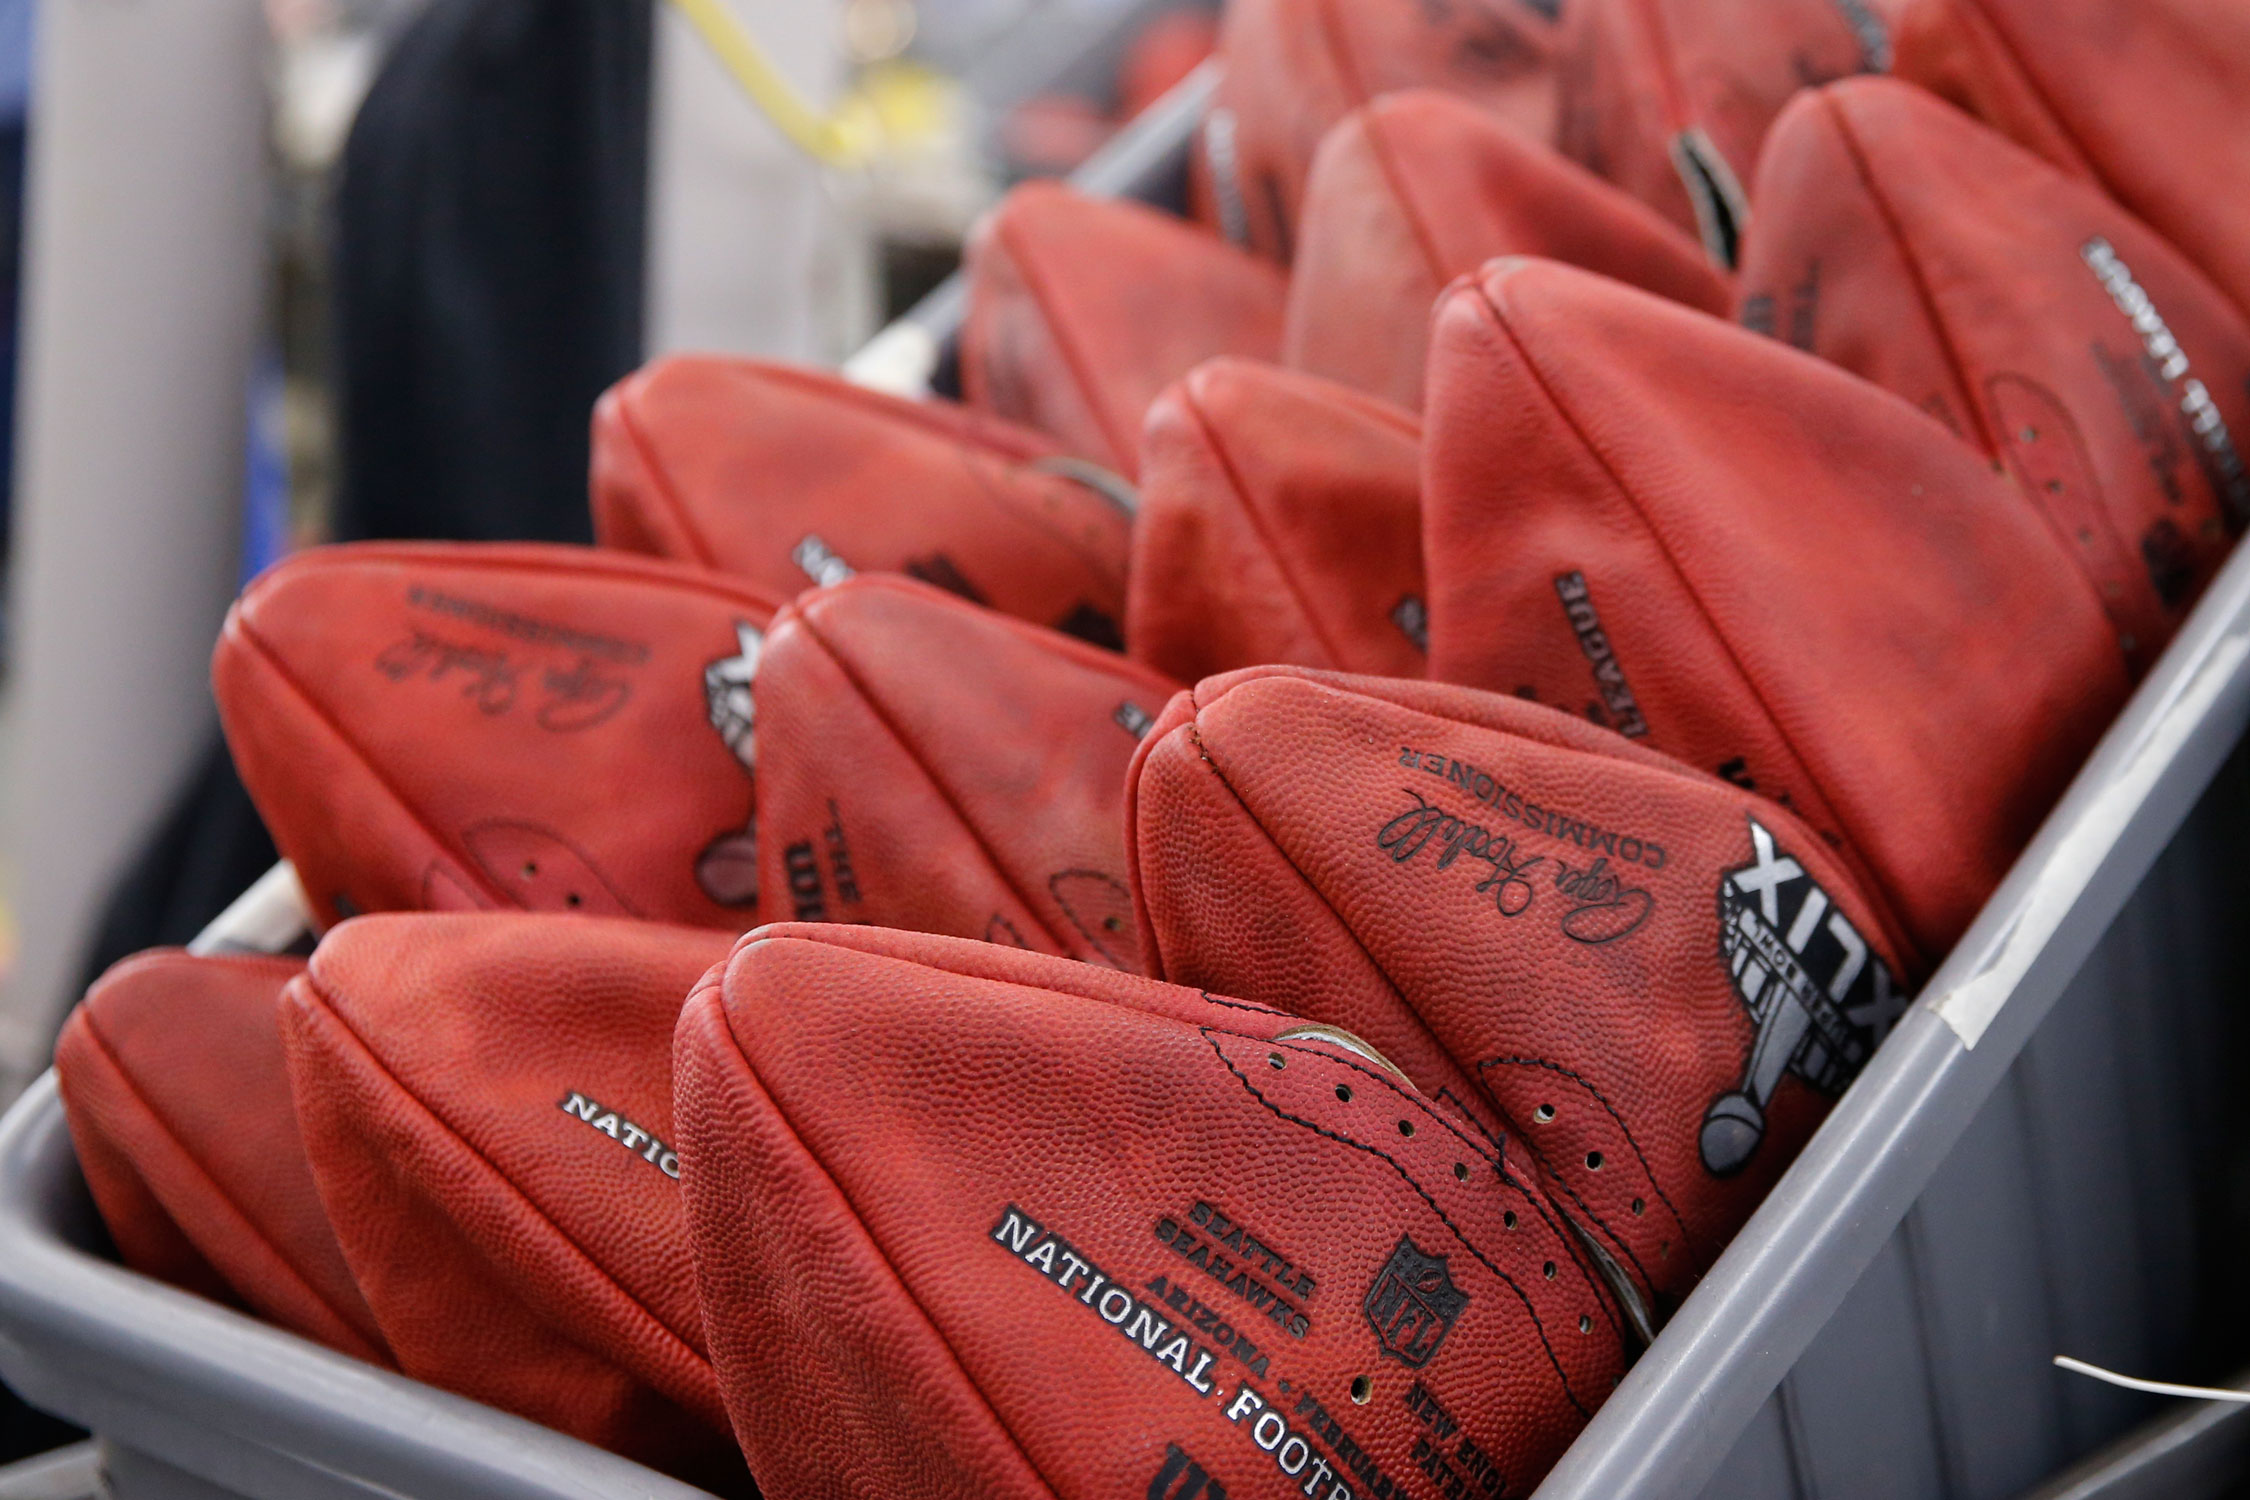 Column: You should feel bad for caring about Deflategate